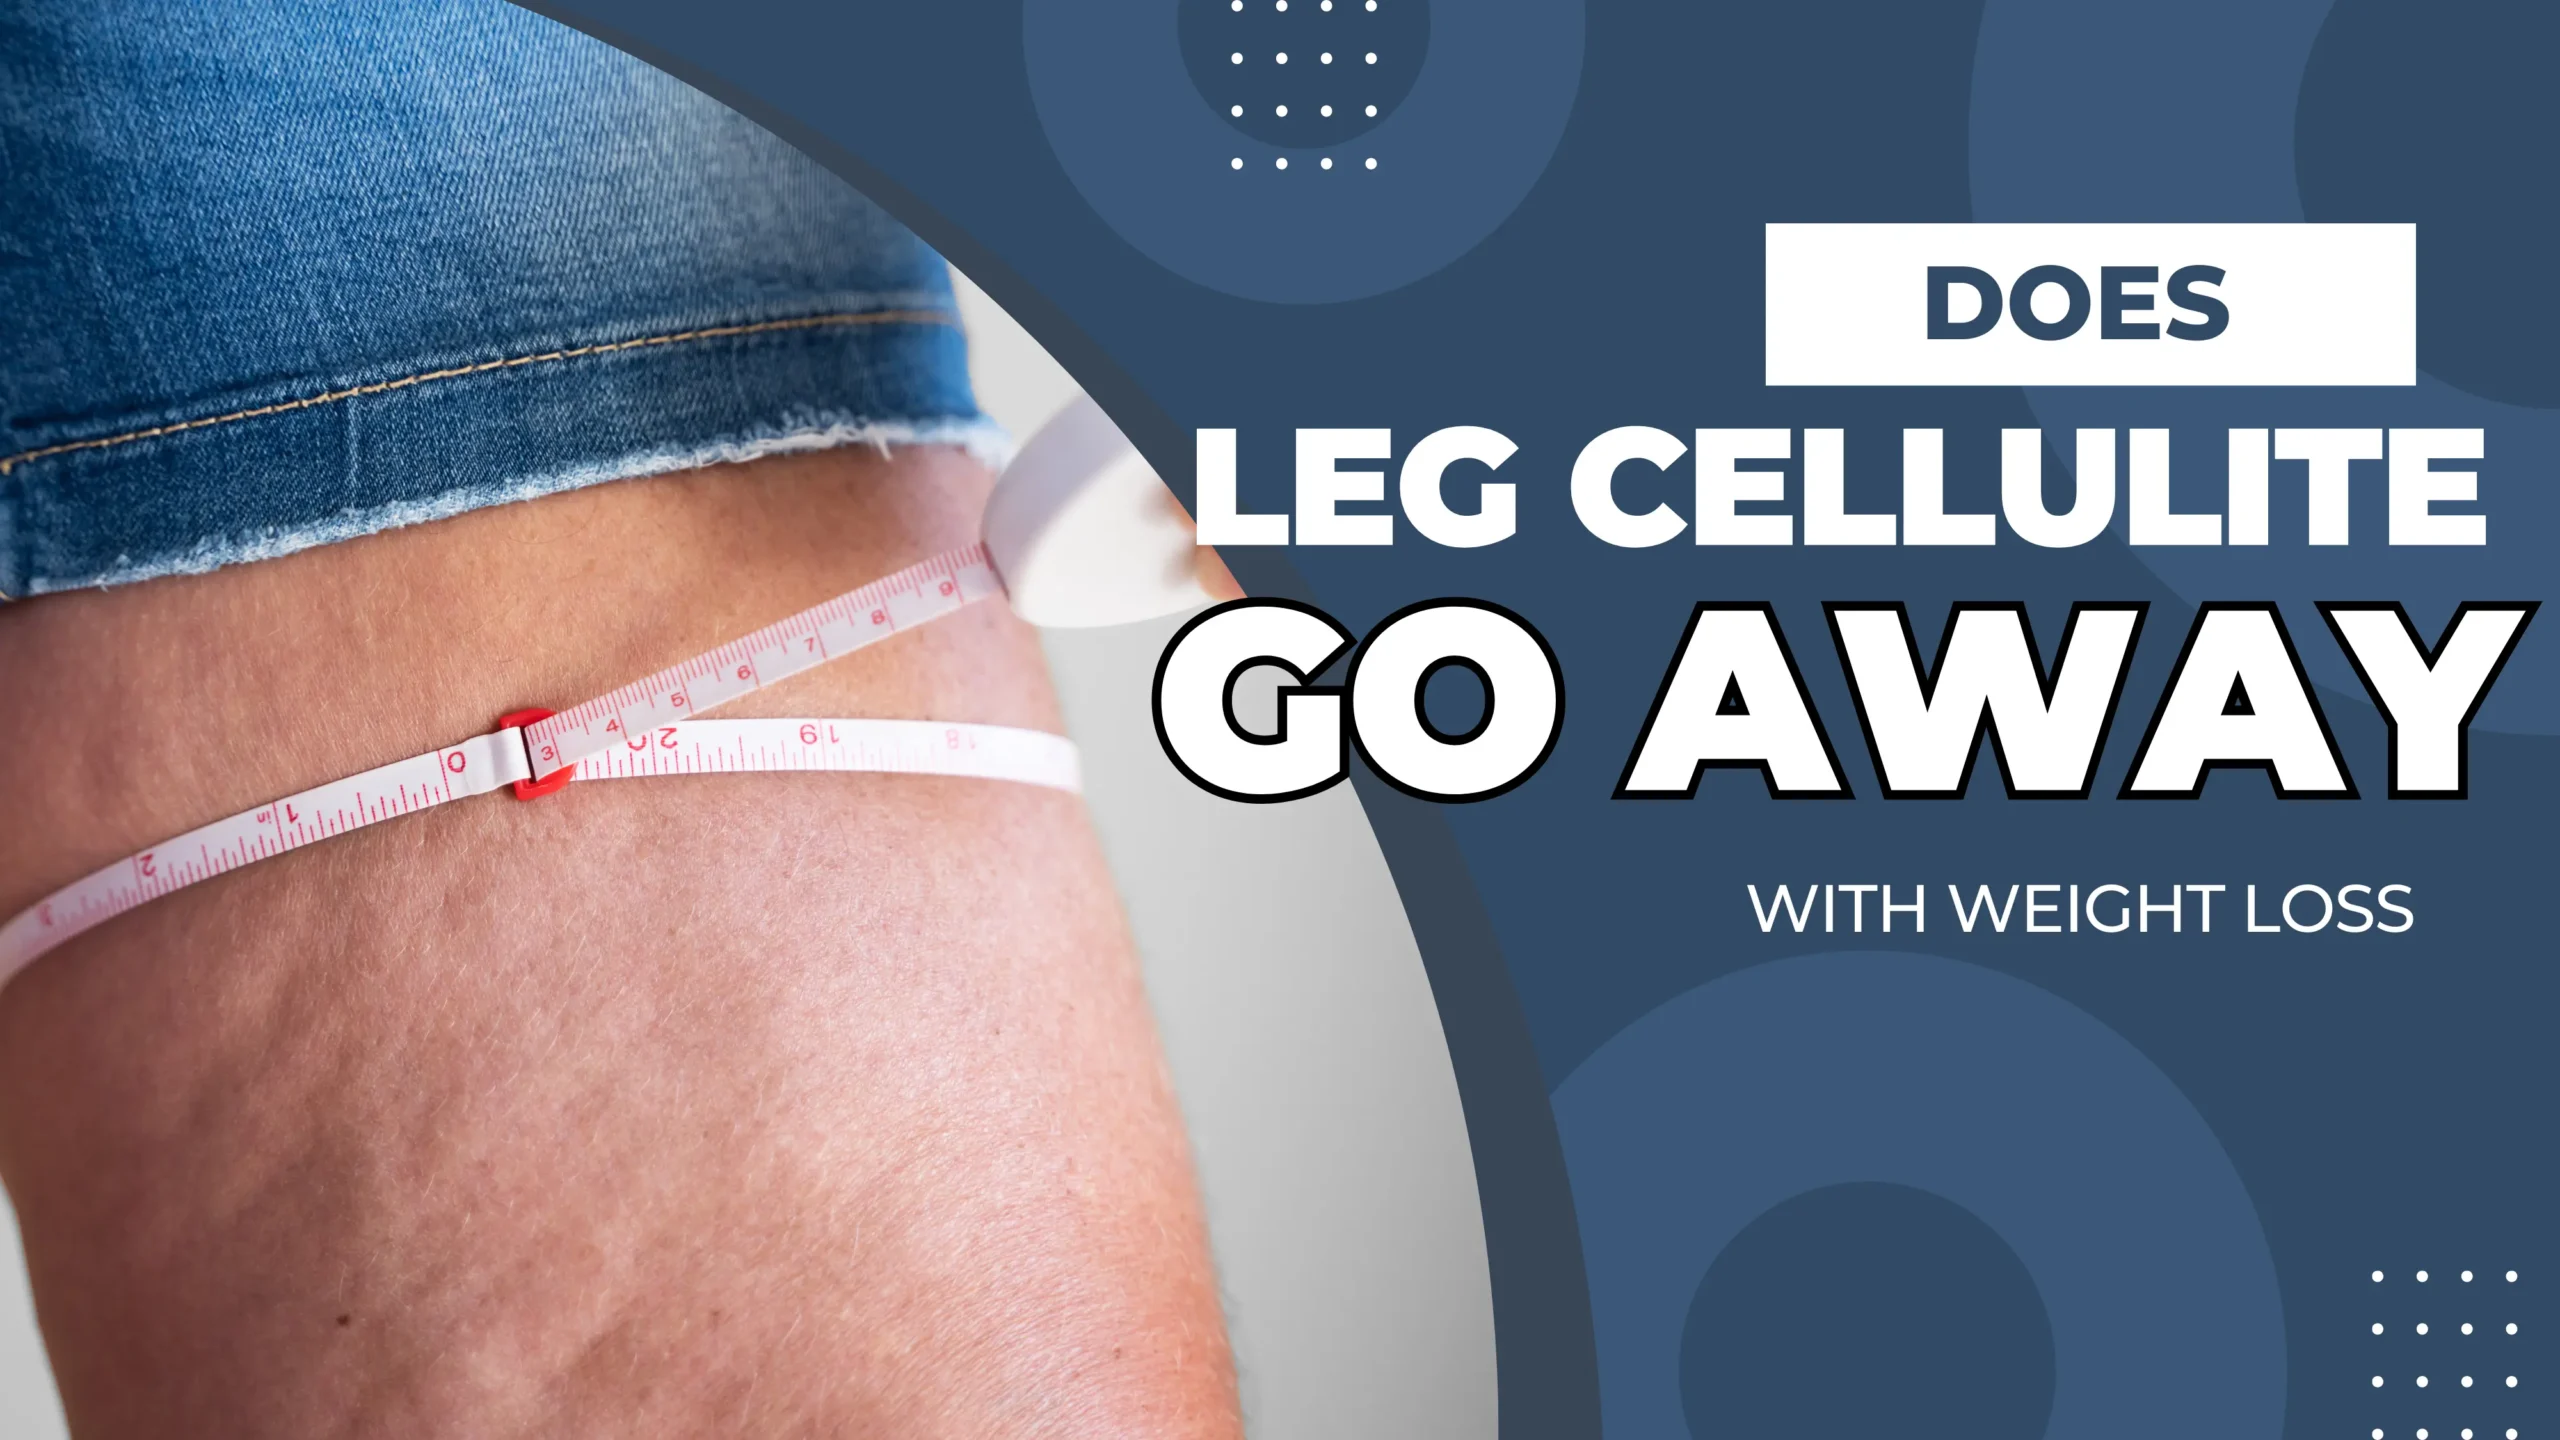 Does leg cellulite go away with weight loss